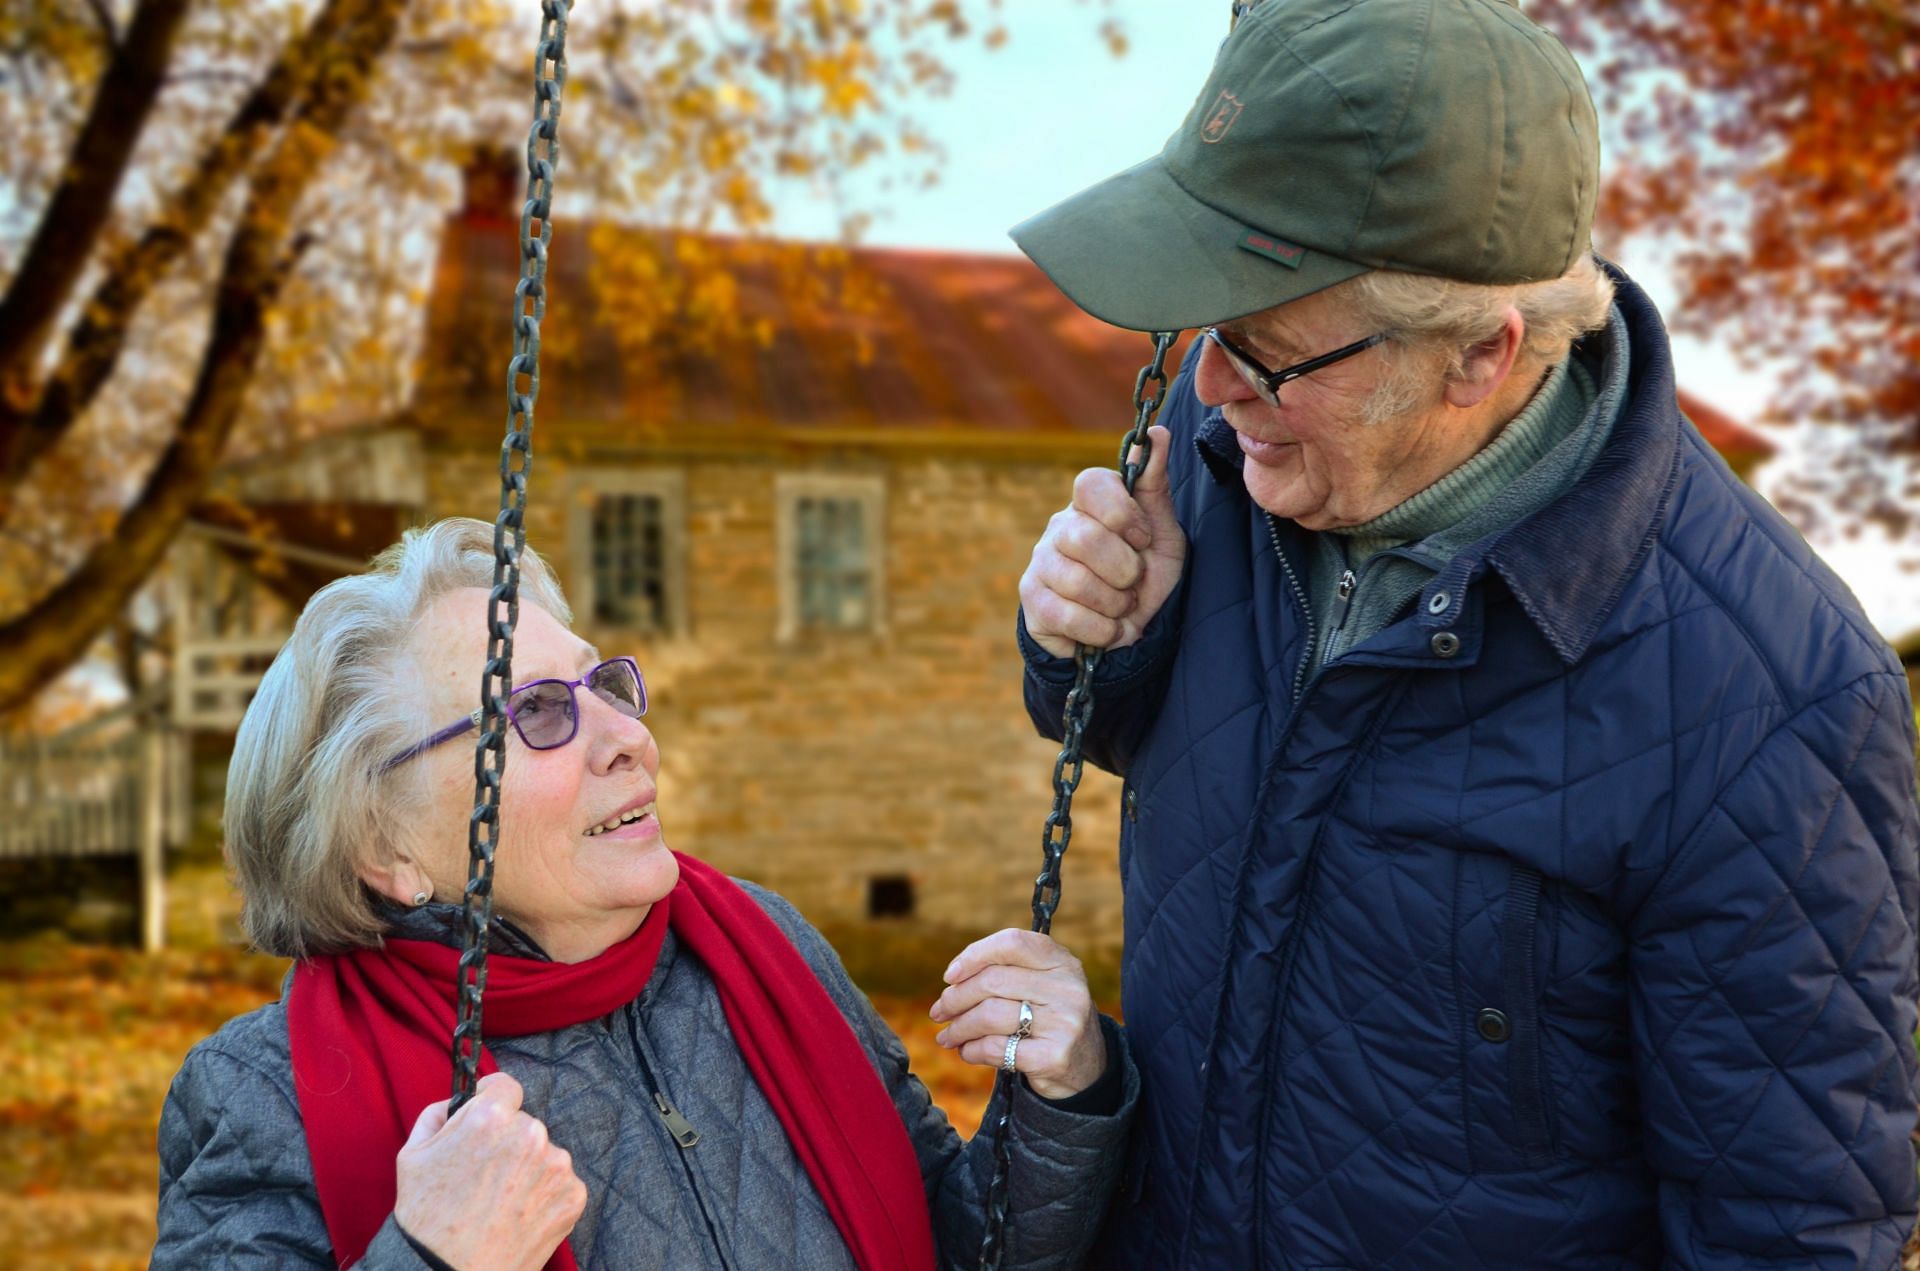 Emotional resilience as a signs you are aging well (image sourced via Pexels / Photo by pixabay)